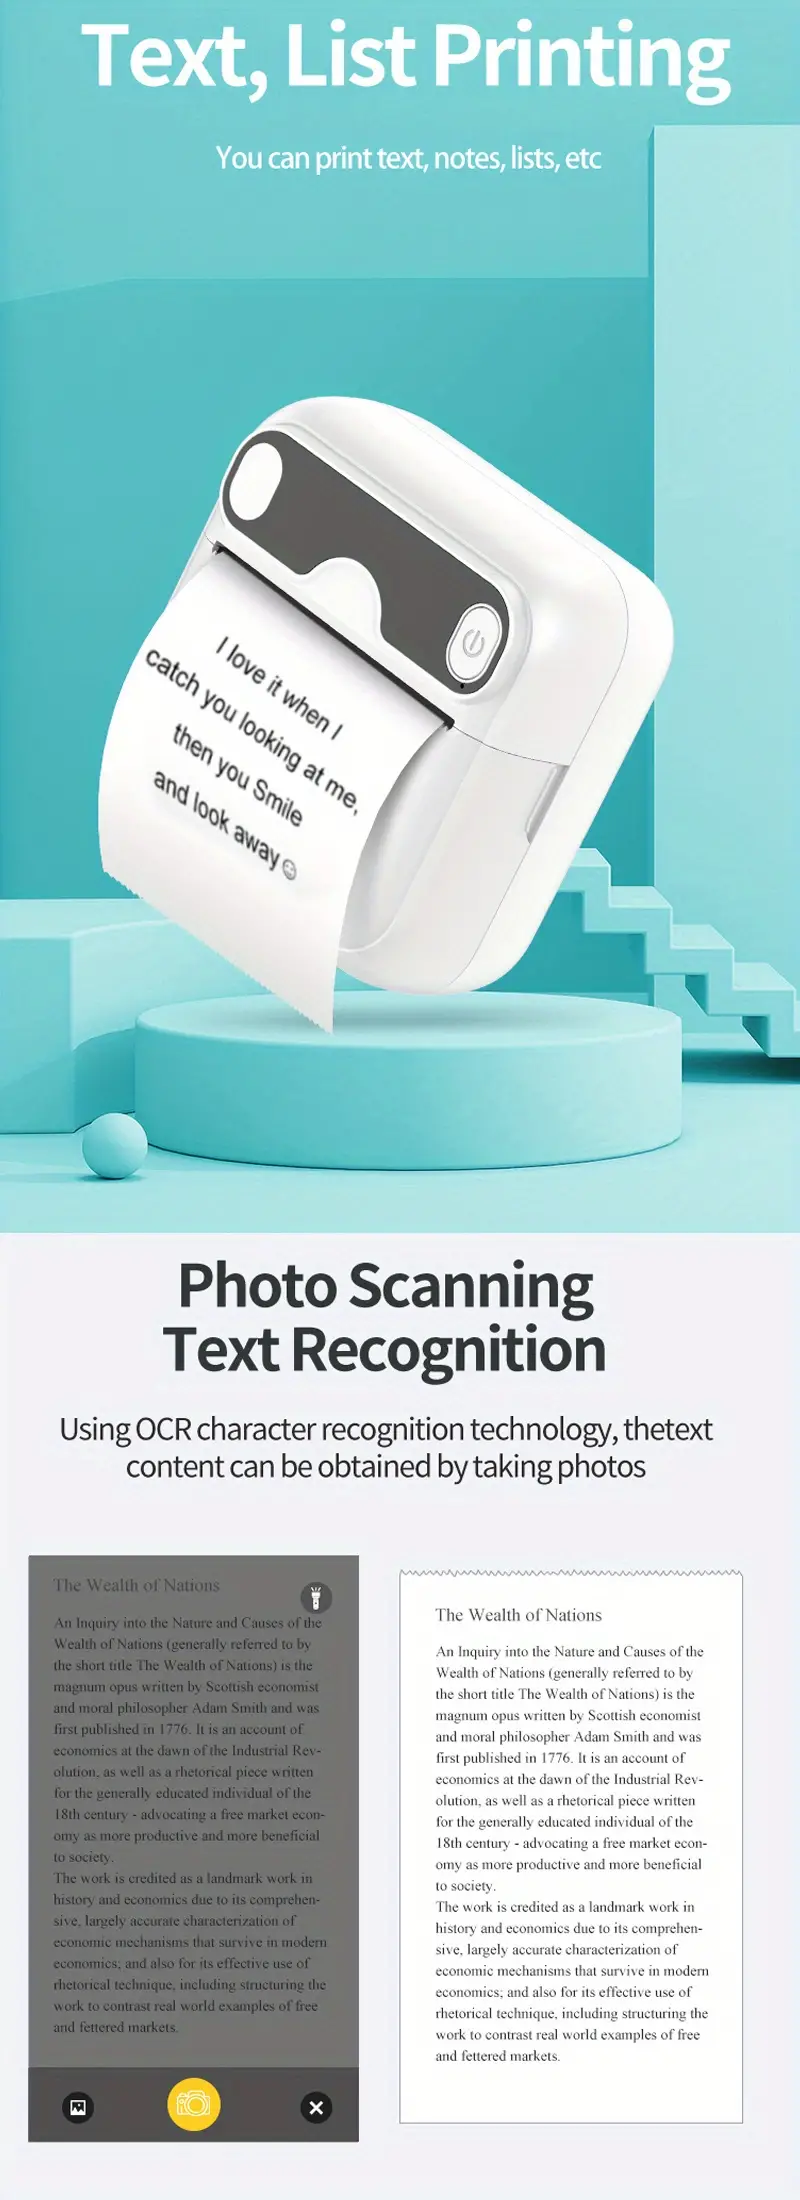 mini thermal printer print photos materials labels documents connect mobile phone wireless download app wireless mobile students office stationery send print paper instructions charging lines details 3